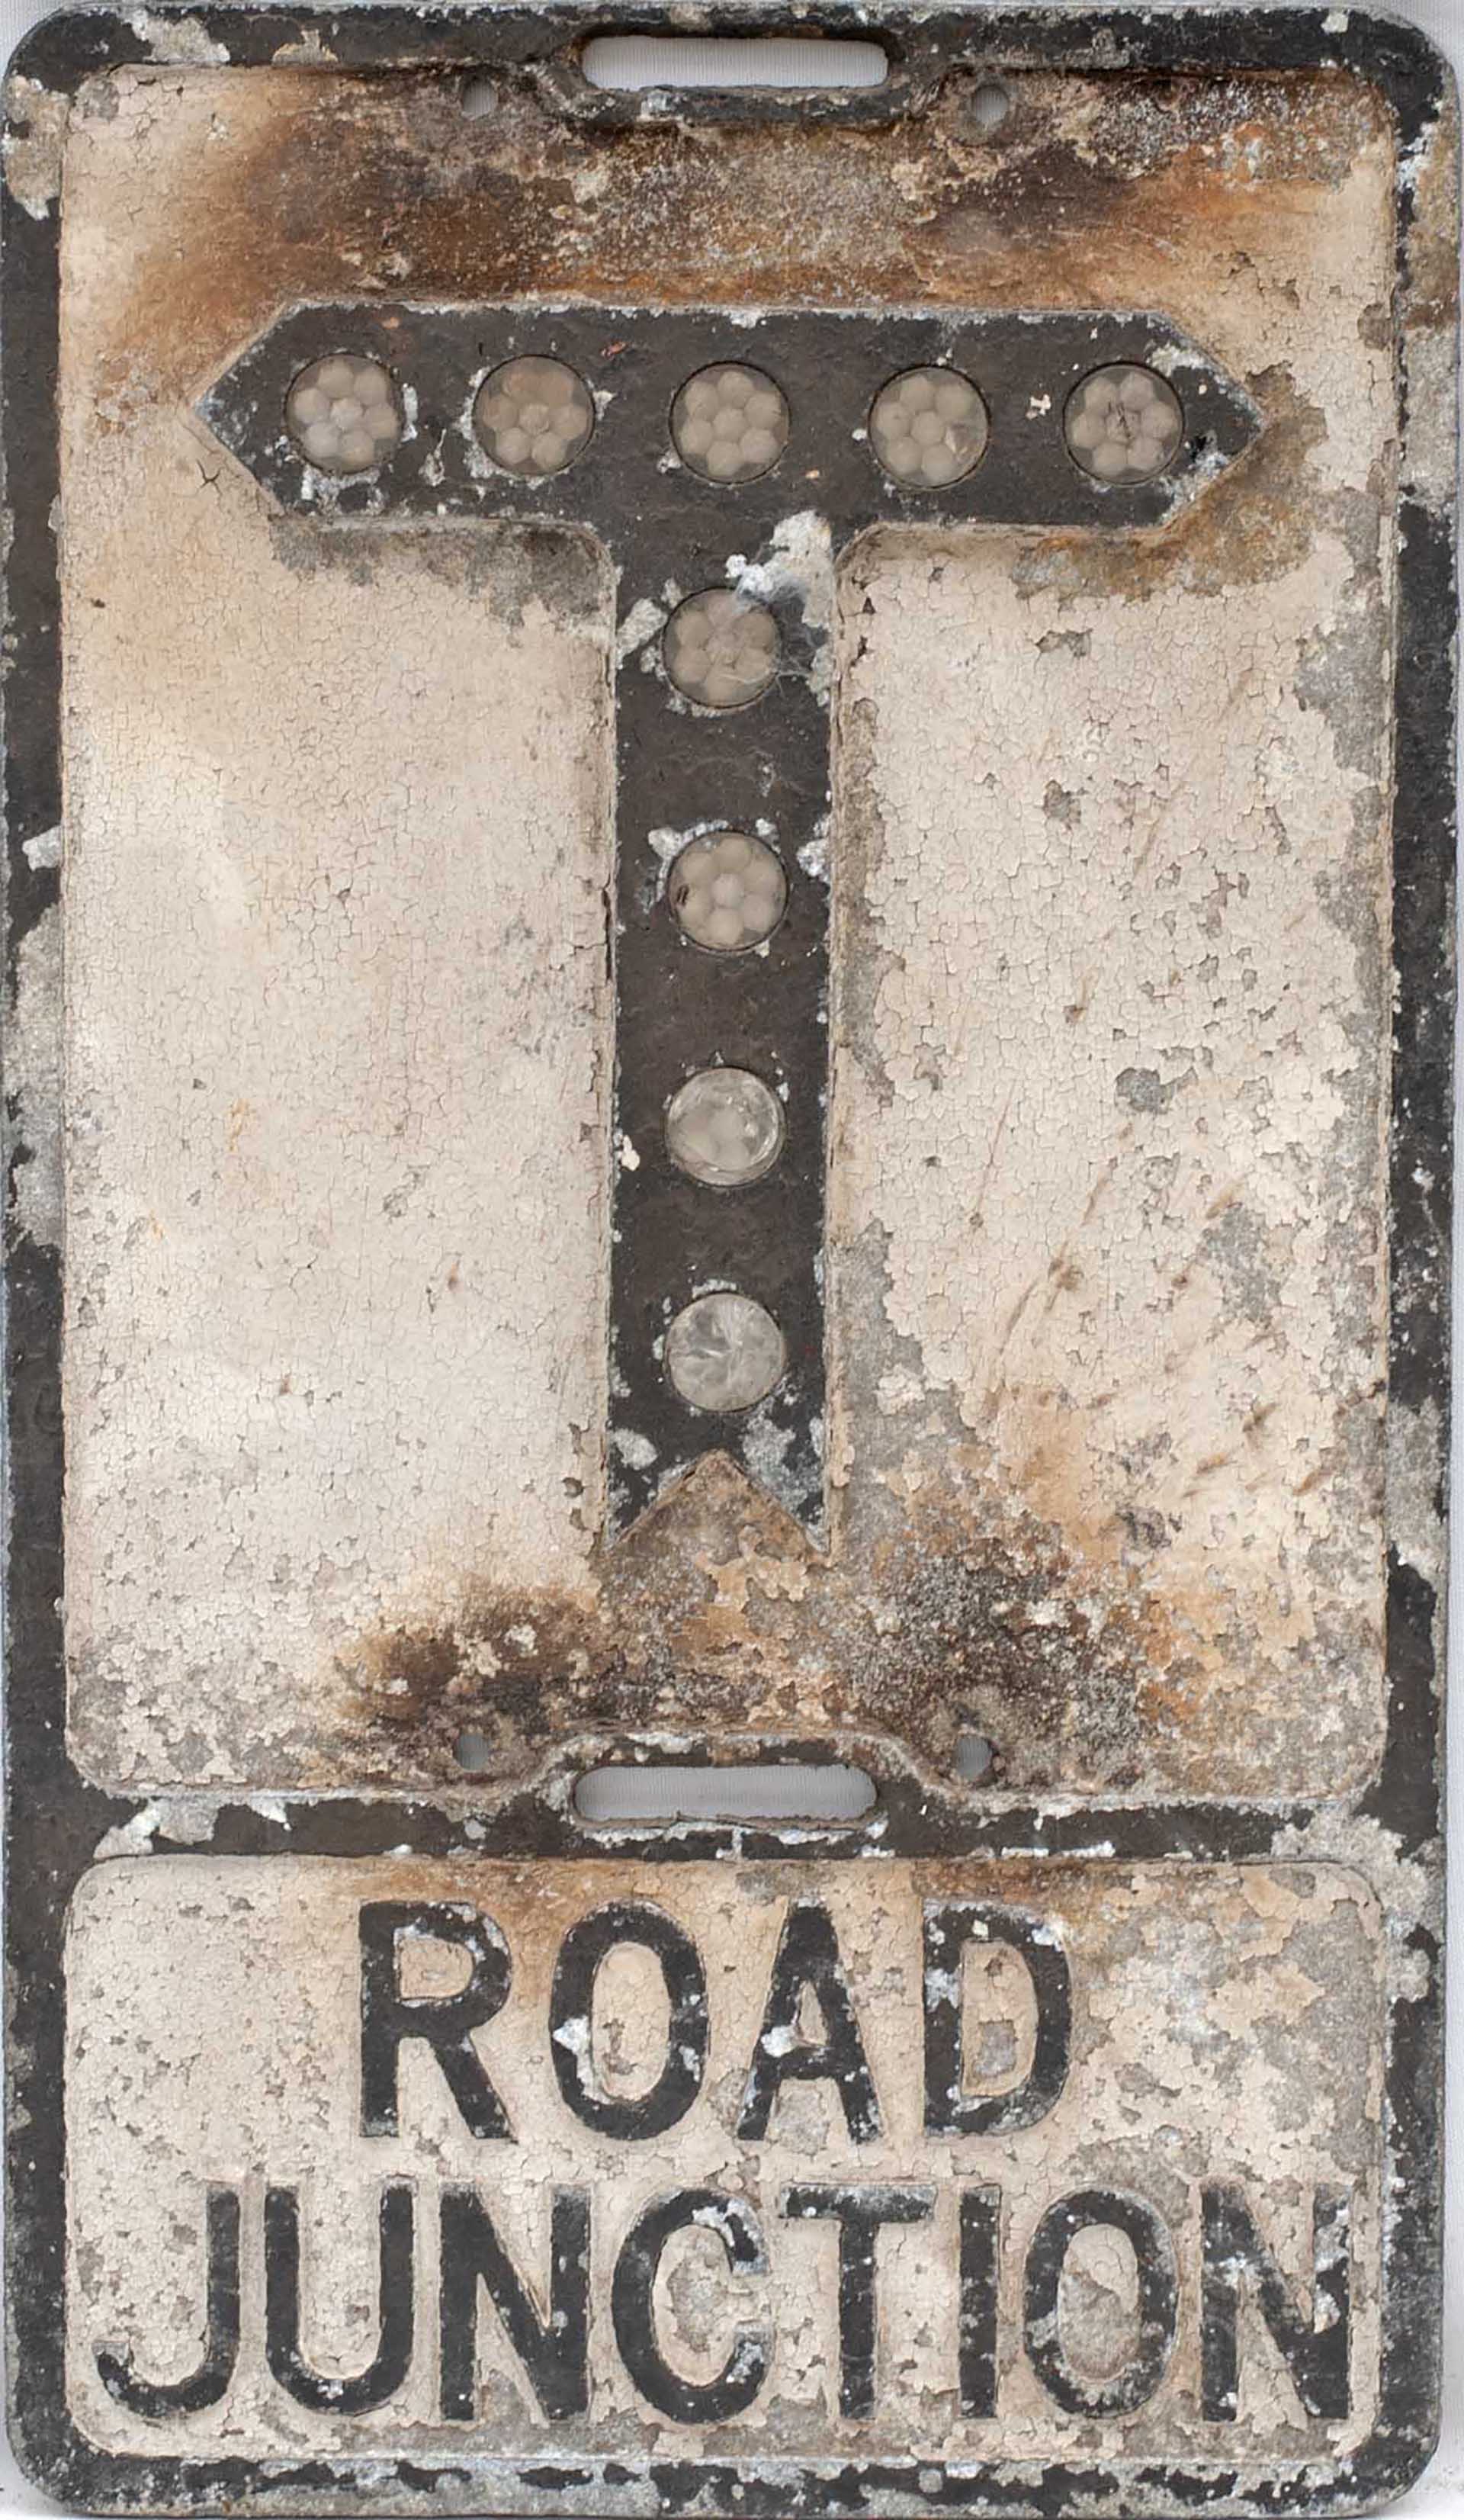 Road sign ROAD JUNCTION T measuring 21.25in x 12.25in. Cast aluminium in as removed condition